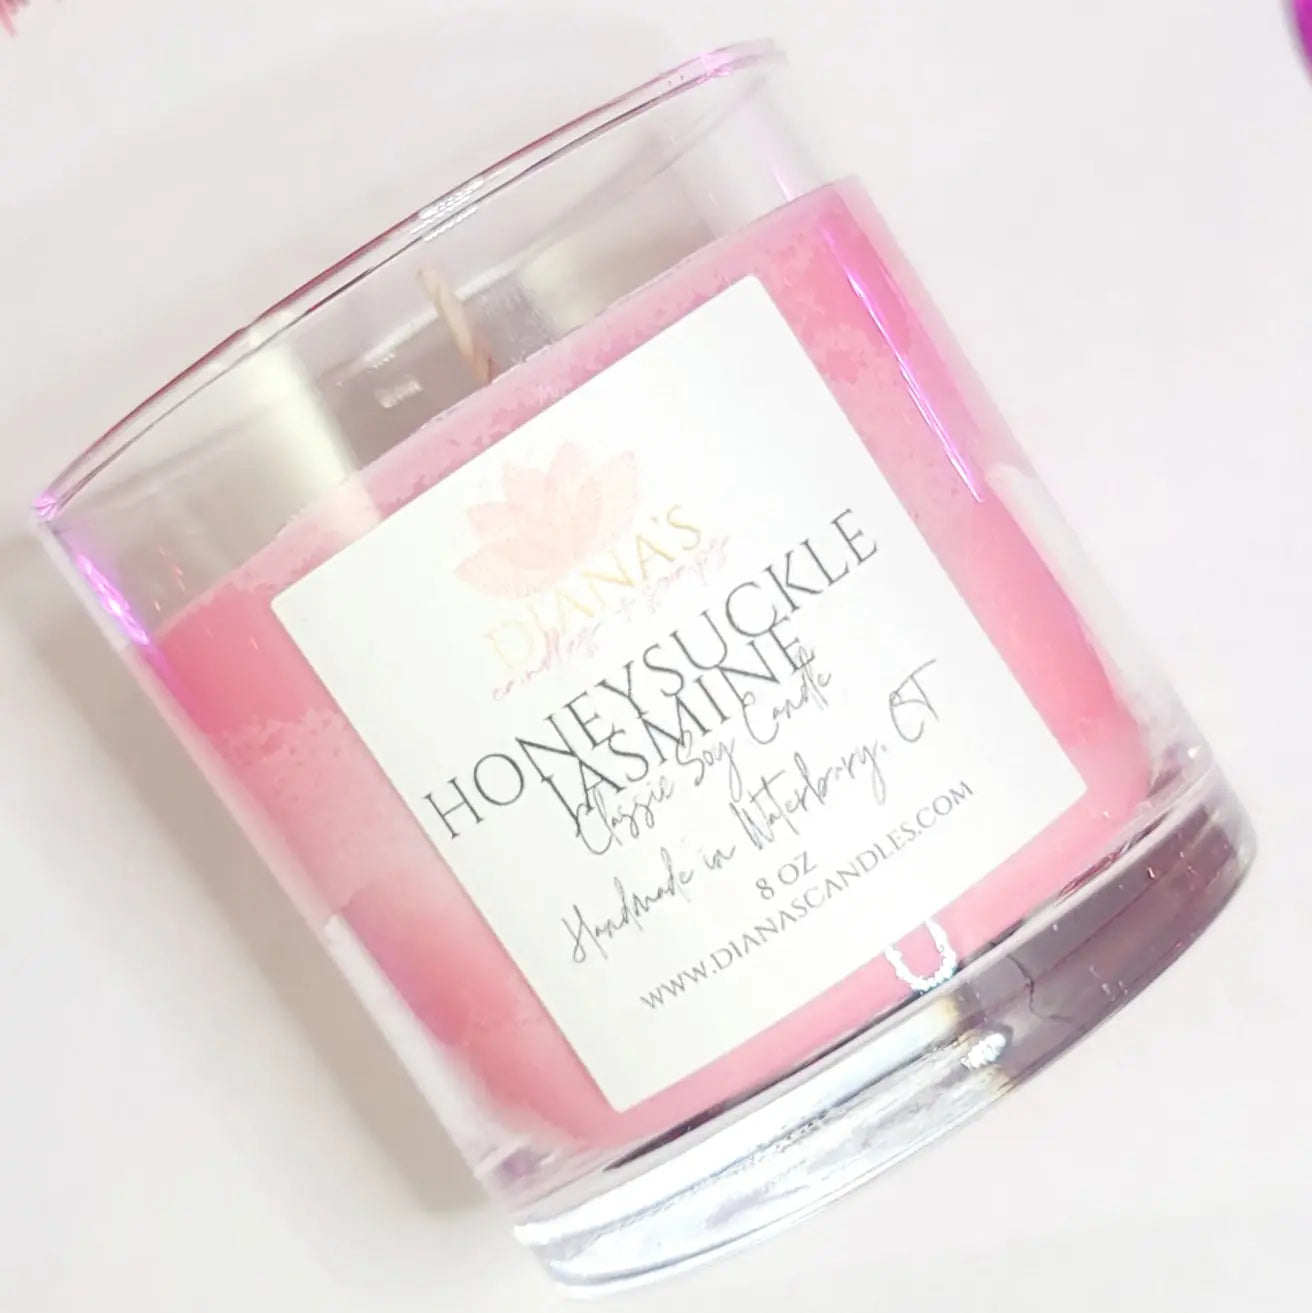 Honeysuckle Jasmine Candle - Diana's Candles and Soaps 